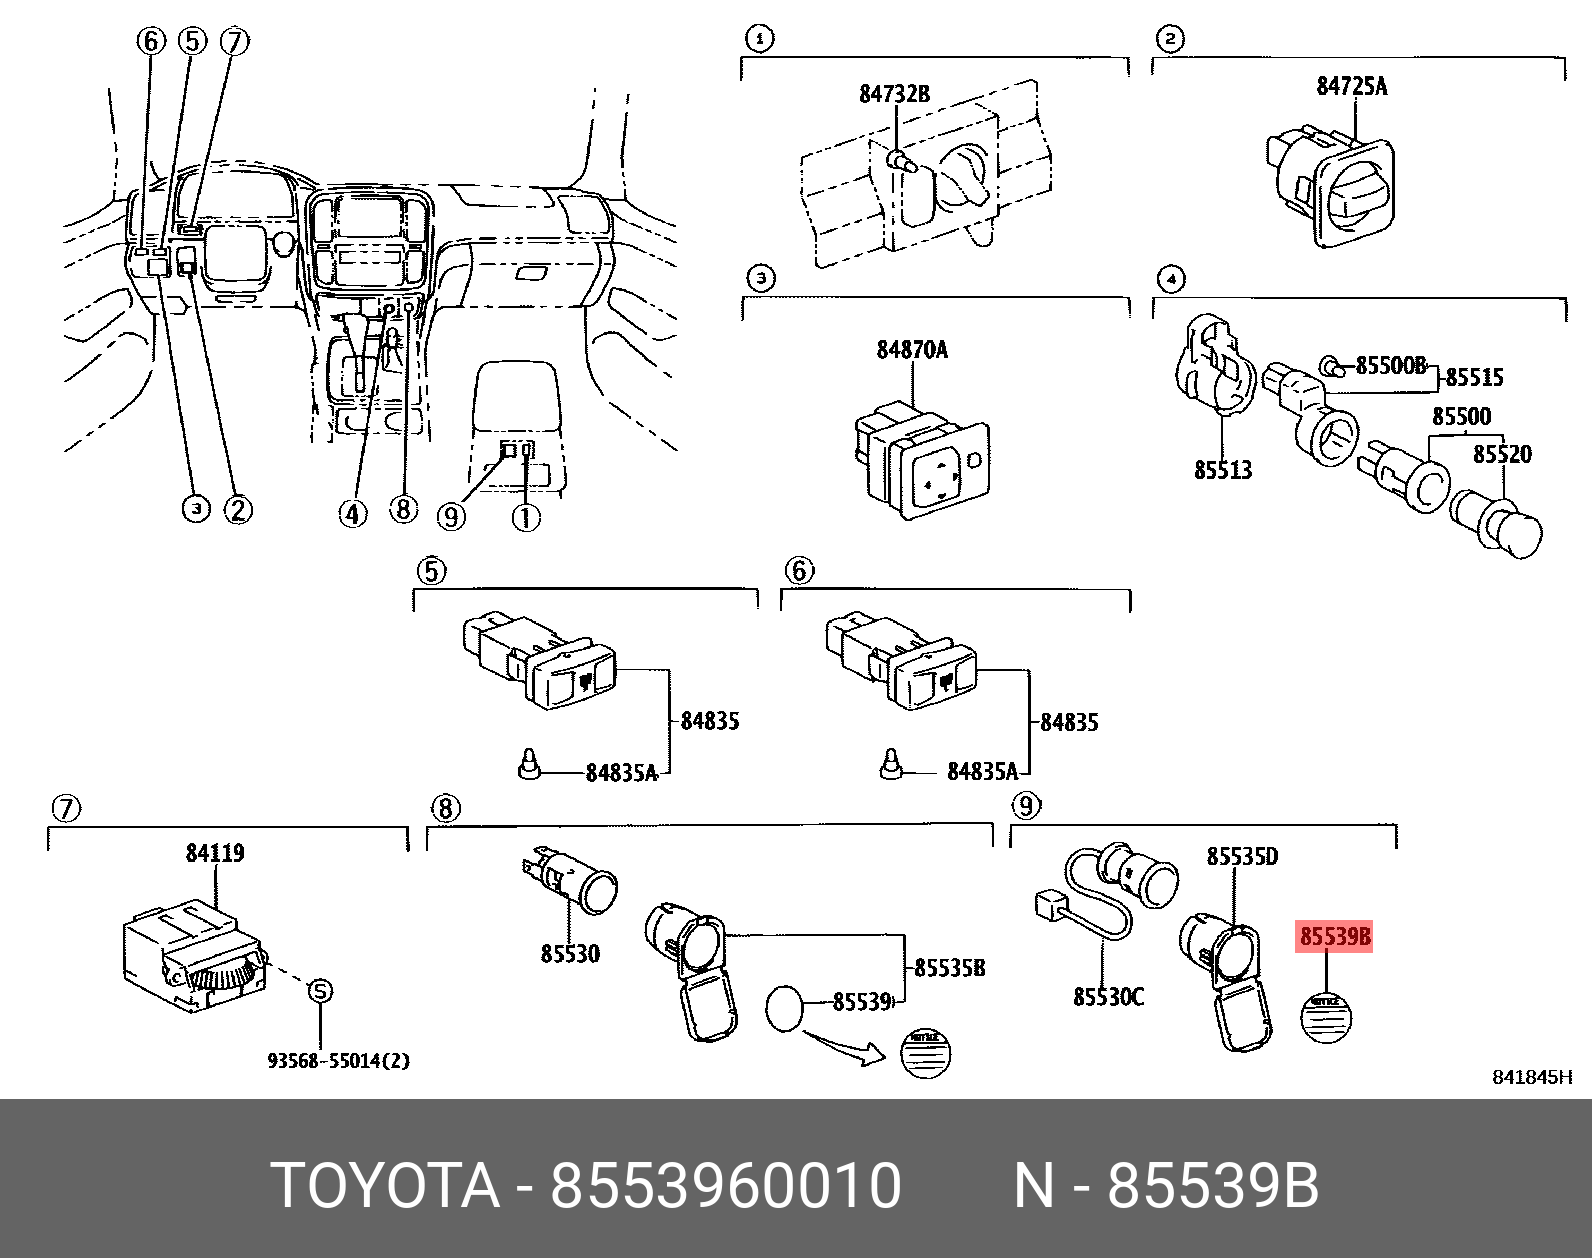 CAMRY HYBRID 201108 - 201704, LABEL, POWER OUTLET NOTICE